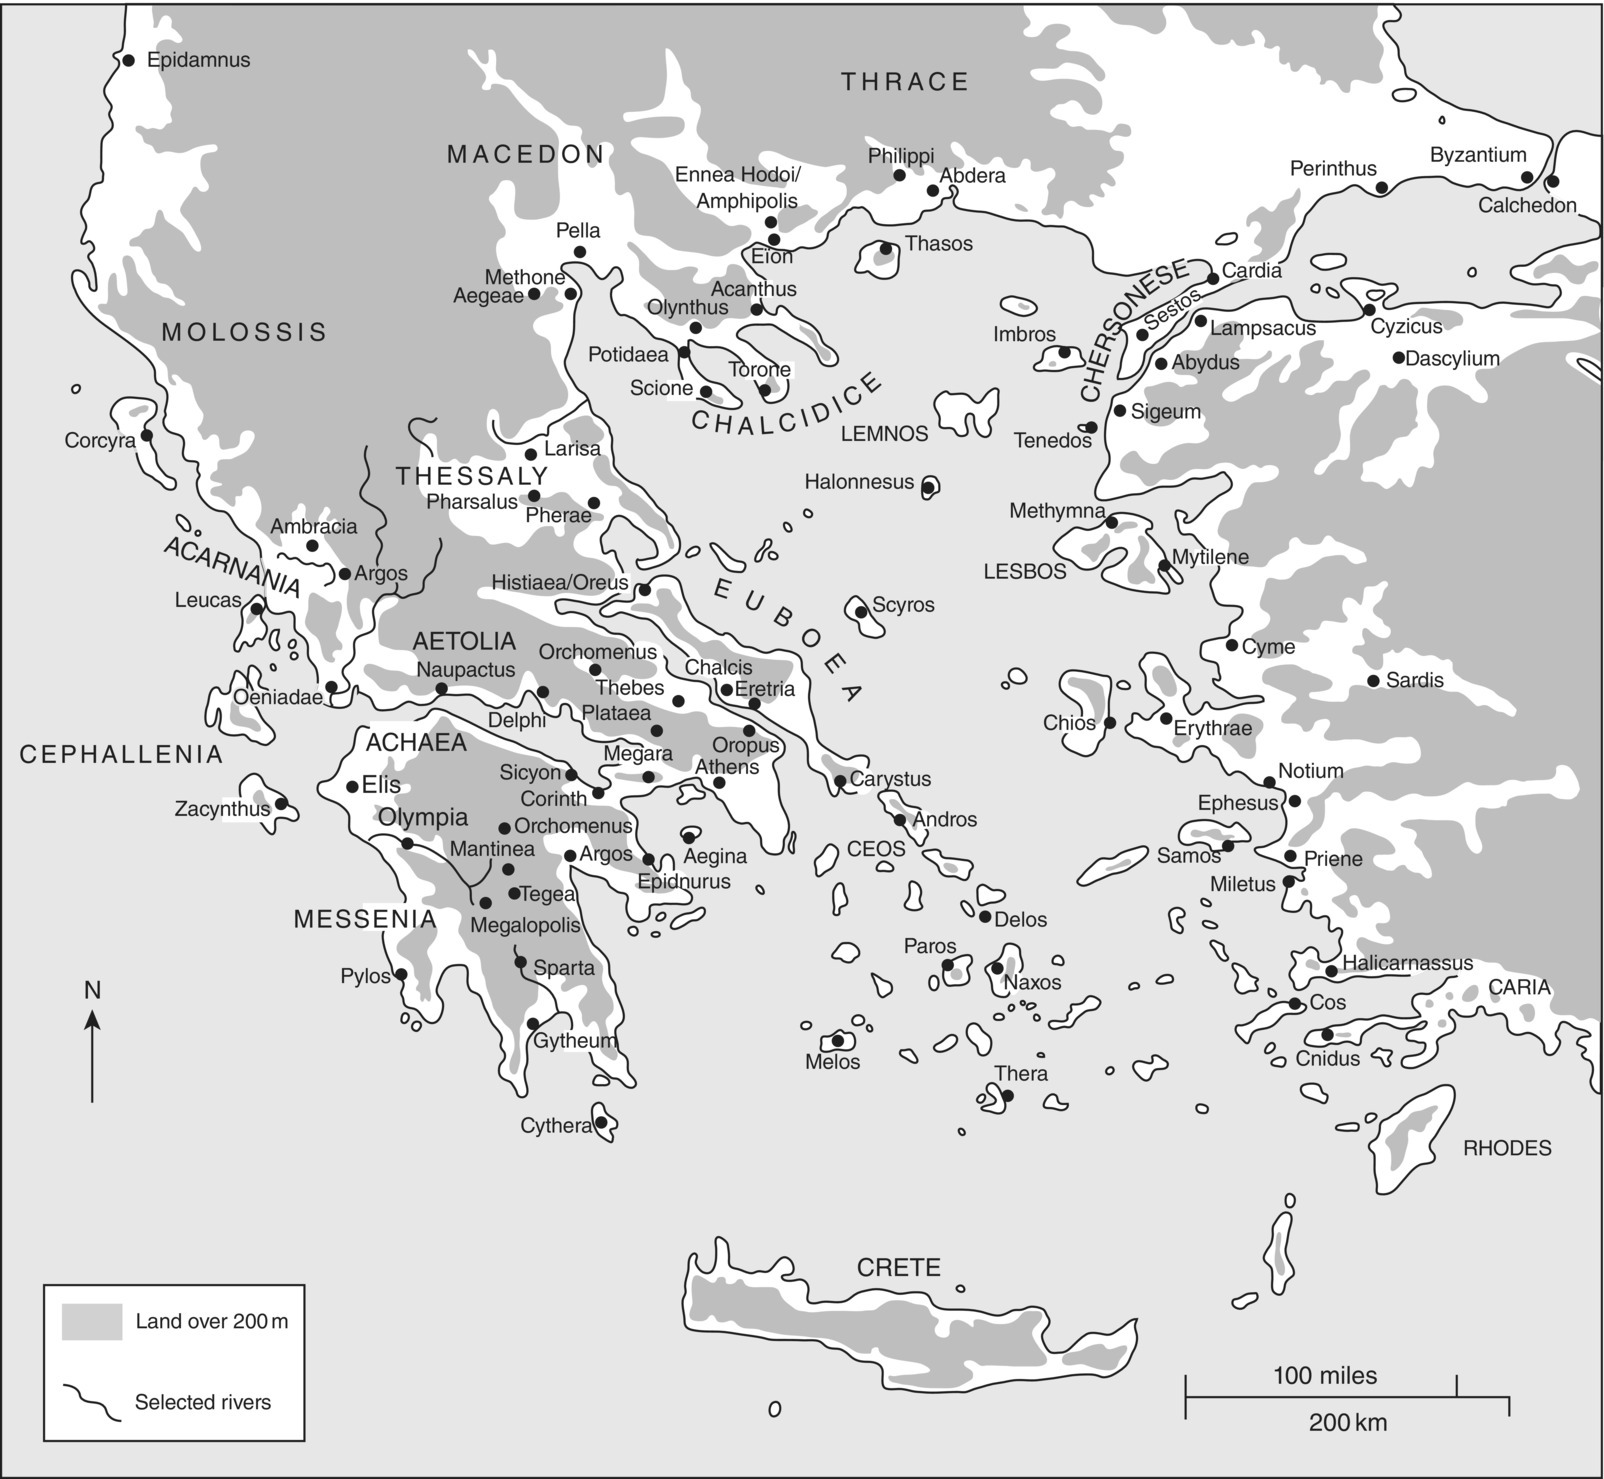 Map of Greece displaying shaded areas and waveforms representing for land over 200 m and selected rivers, respectively. Dot markers marking Cythera, Gytheum, Sparta, Pylos, Megalopolis, etc. are also indicated.